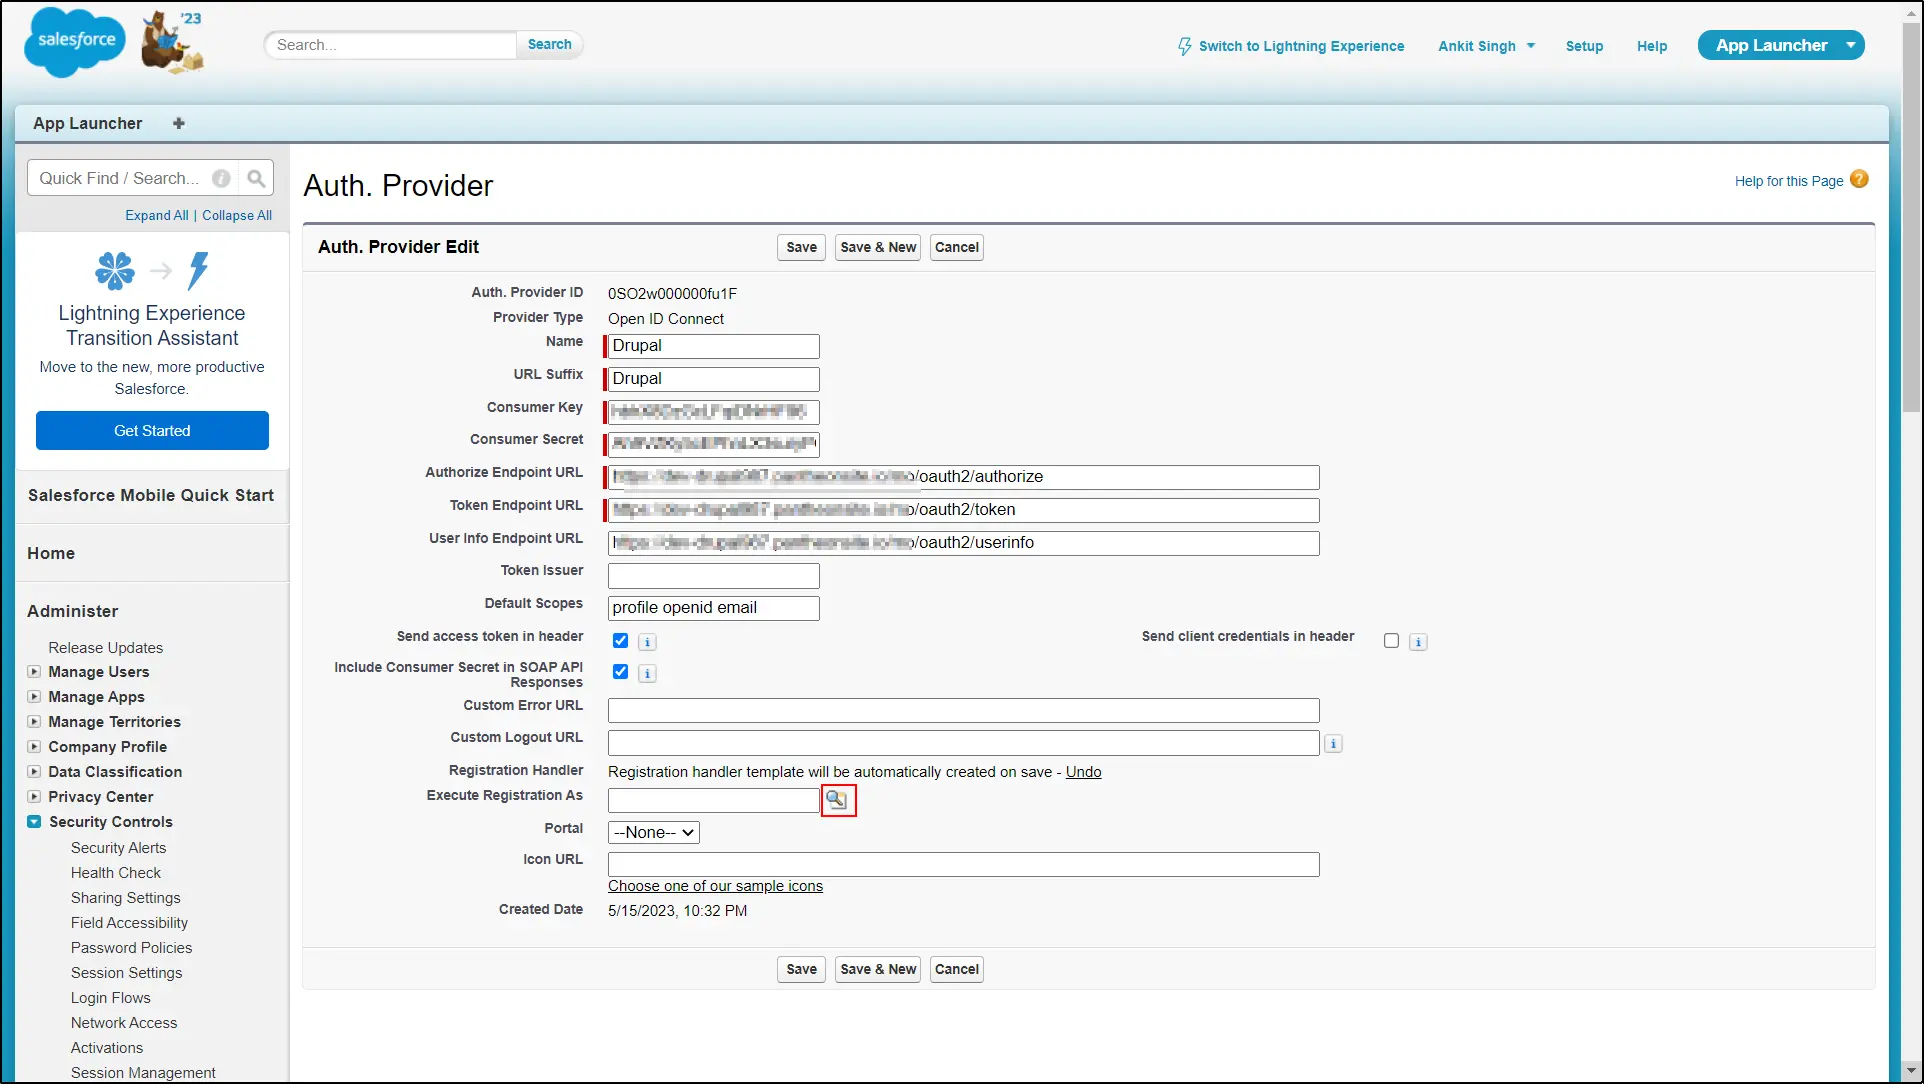  Integrating Salesforce with Drupal OAuth/OIDC Provider - Click search icon next to Execute Registration Handler As